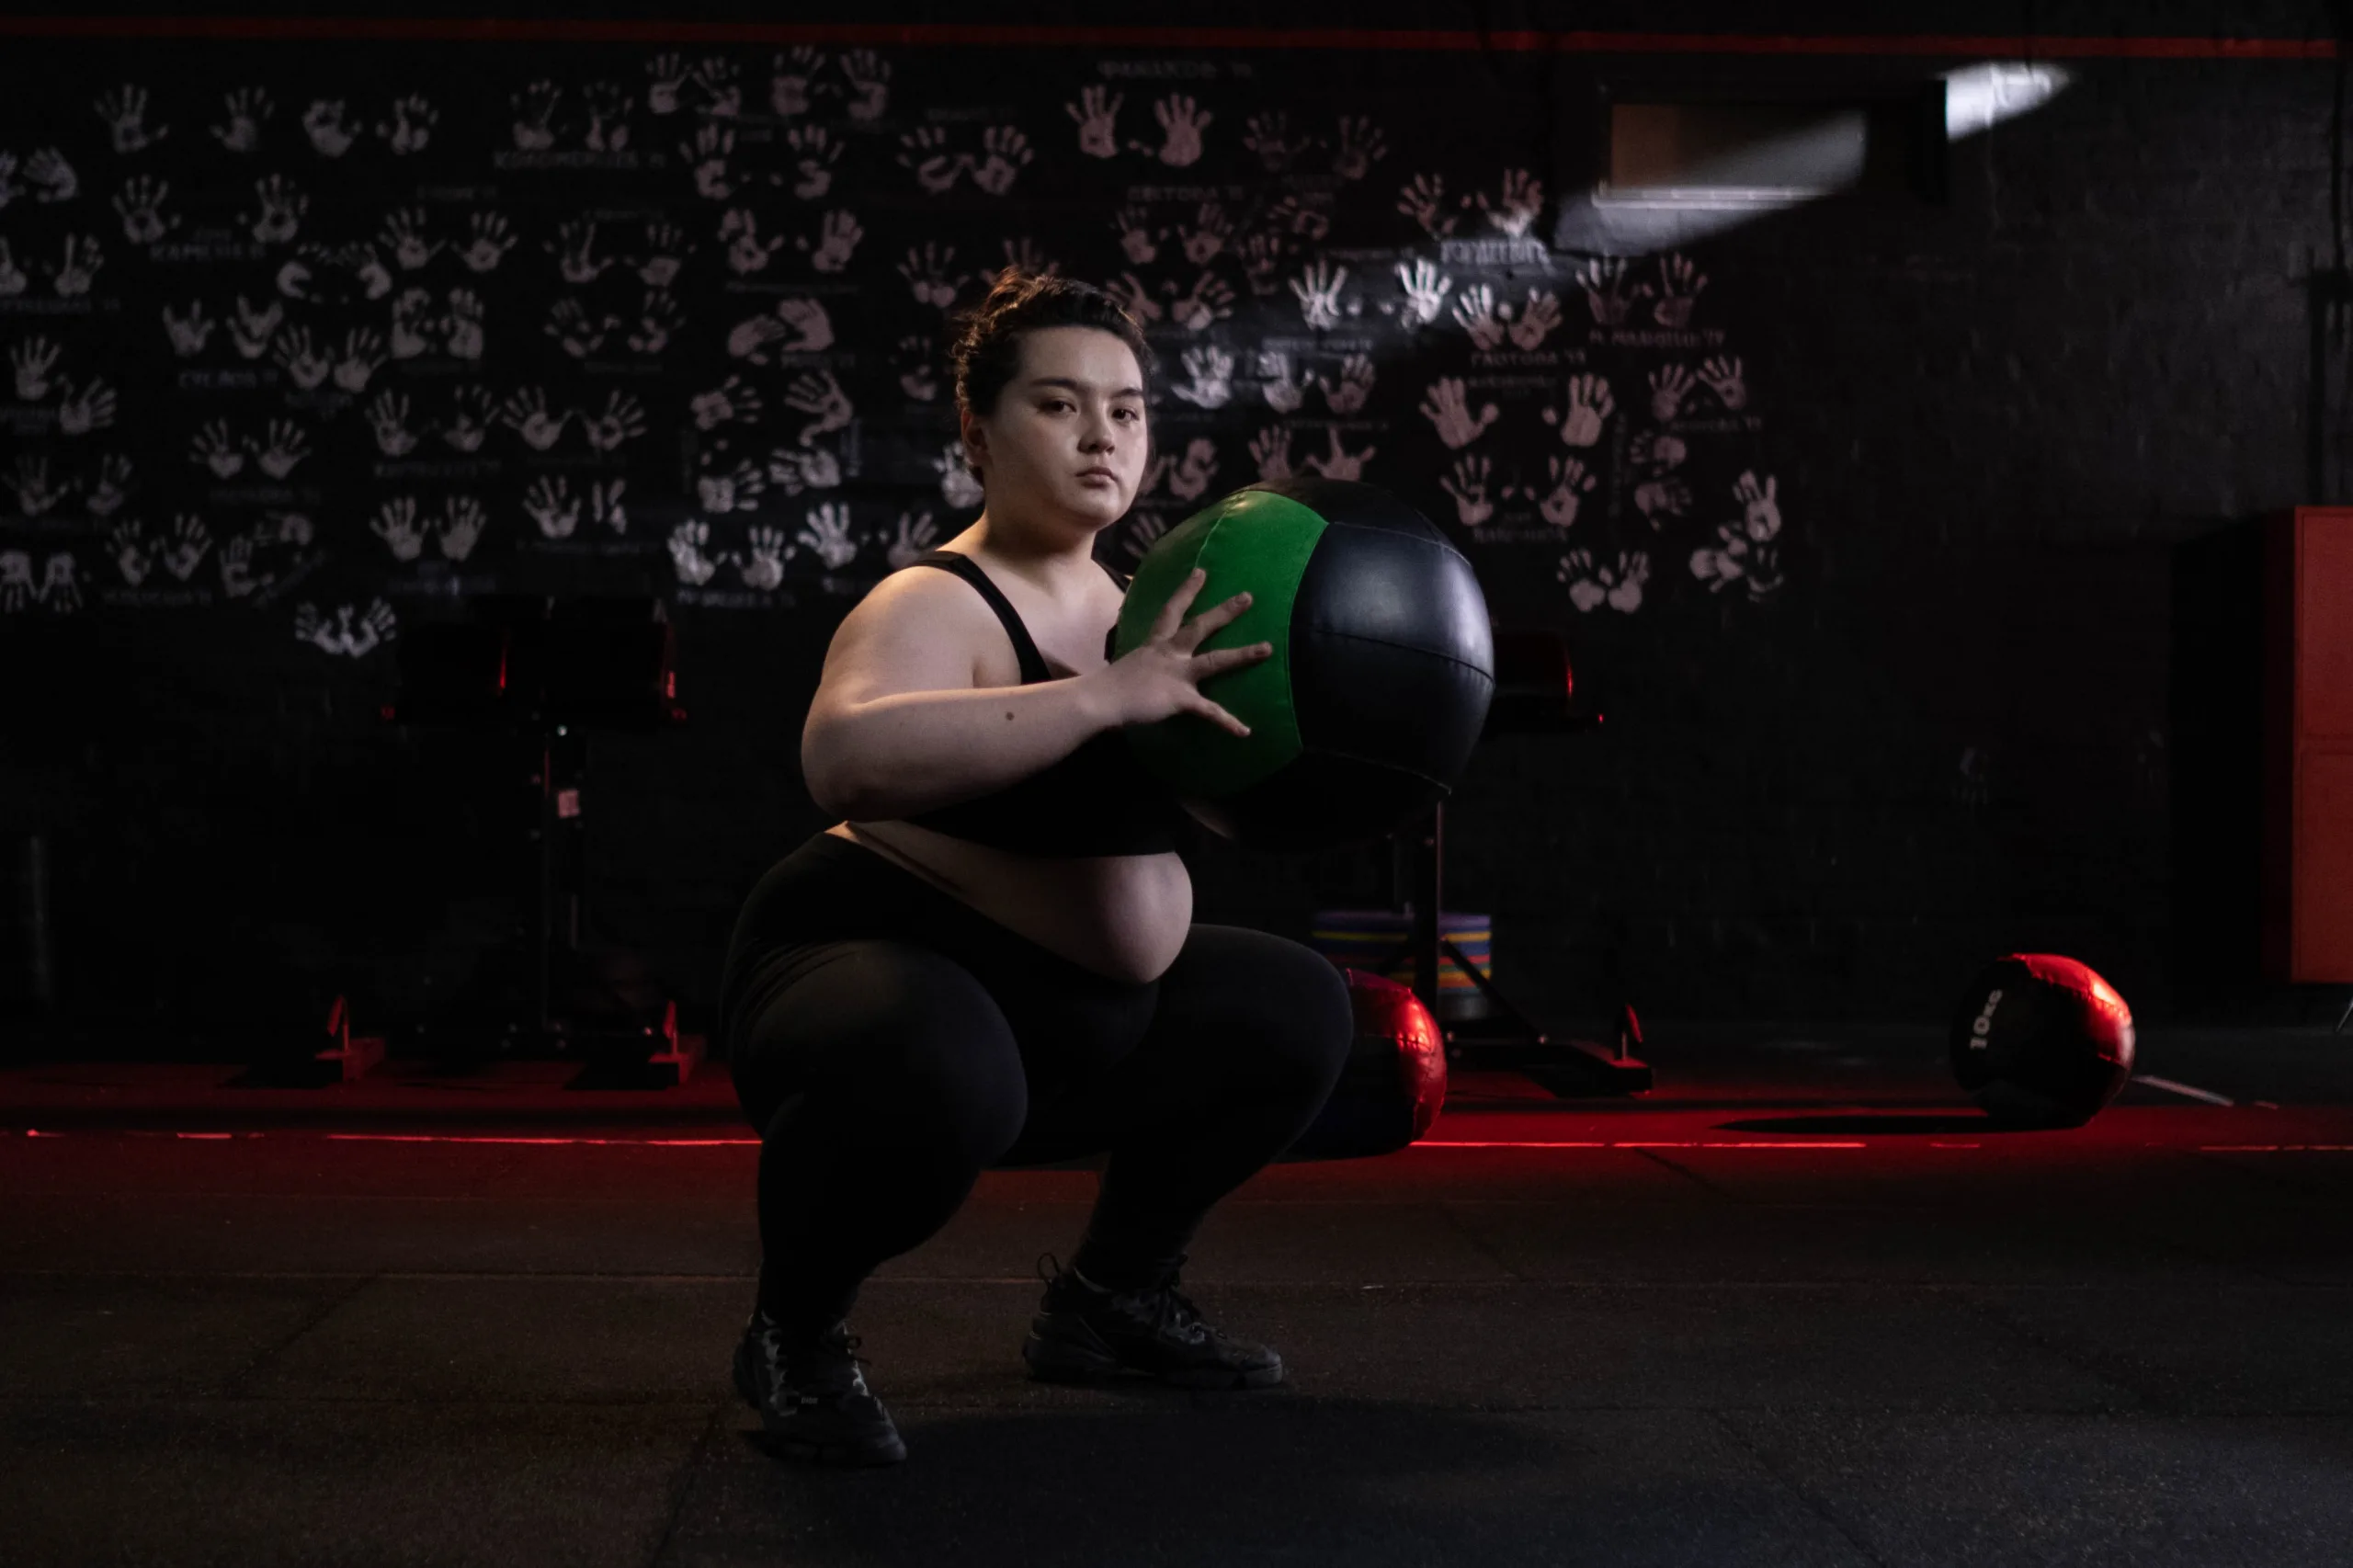 overweight woman in squat position holding ball